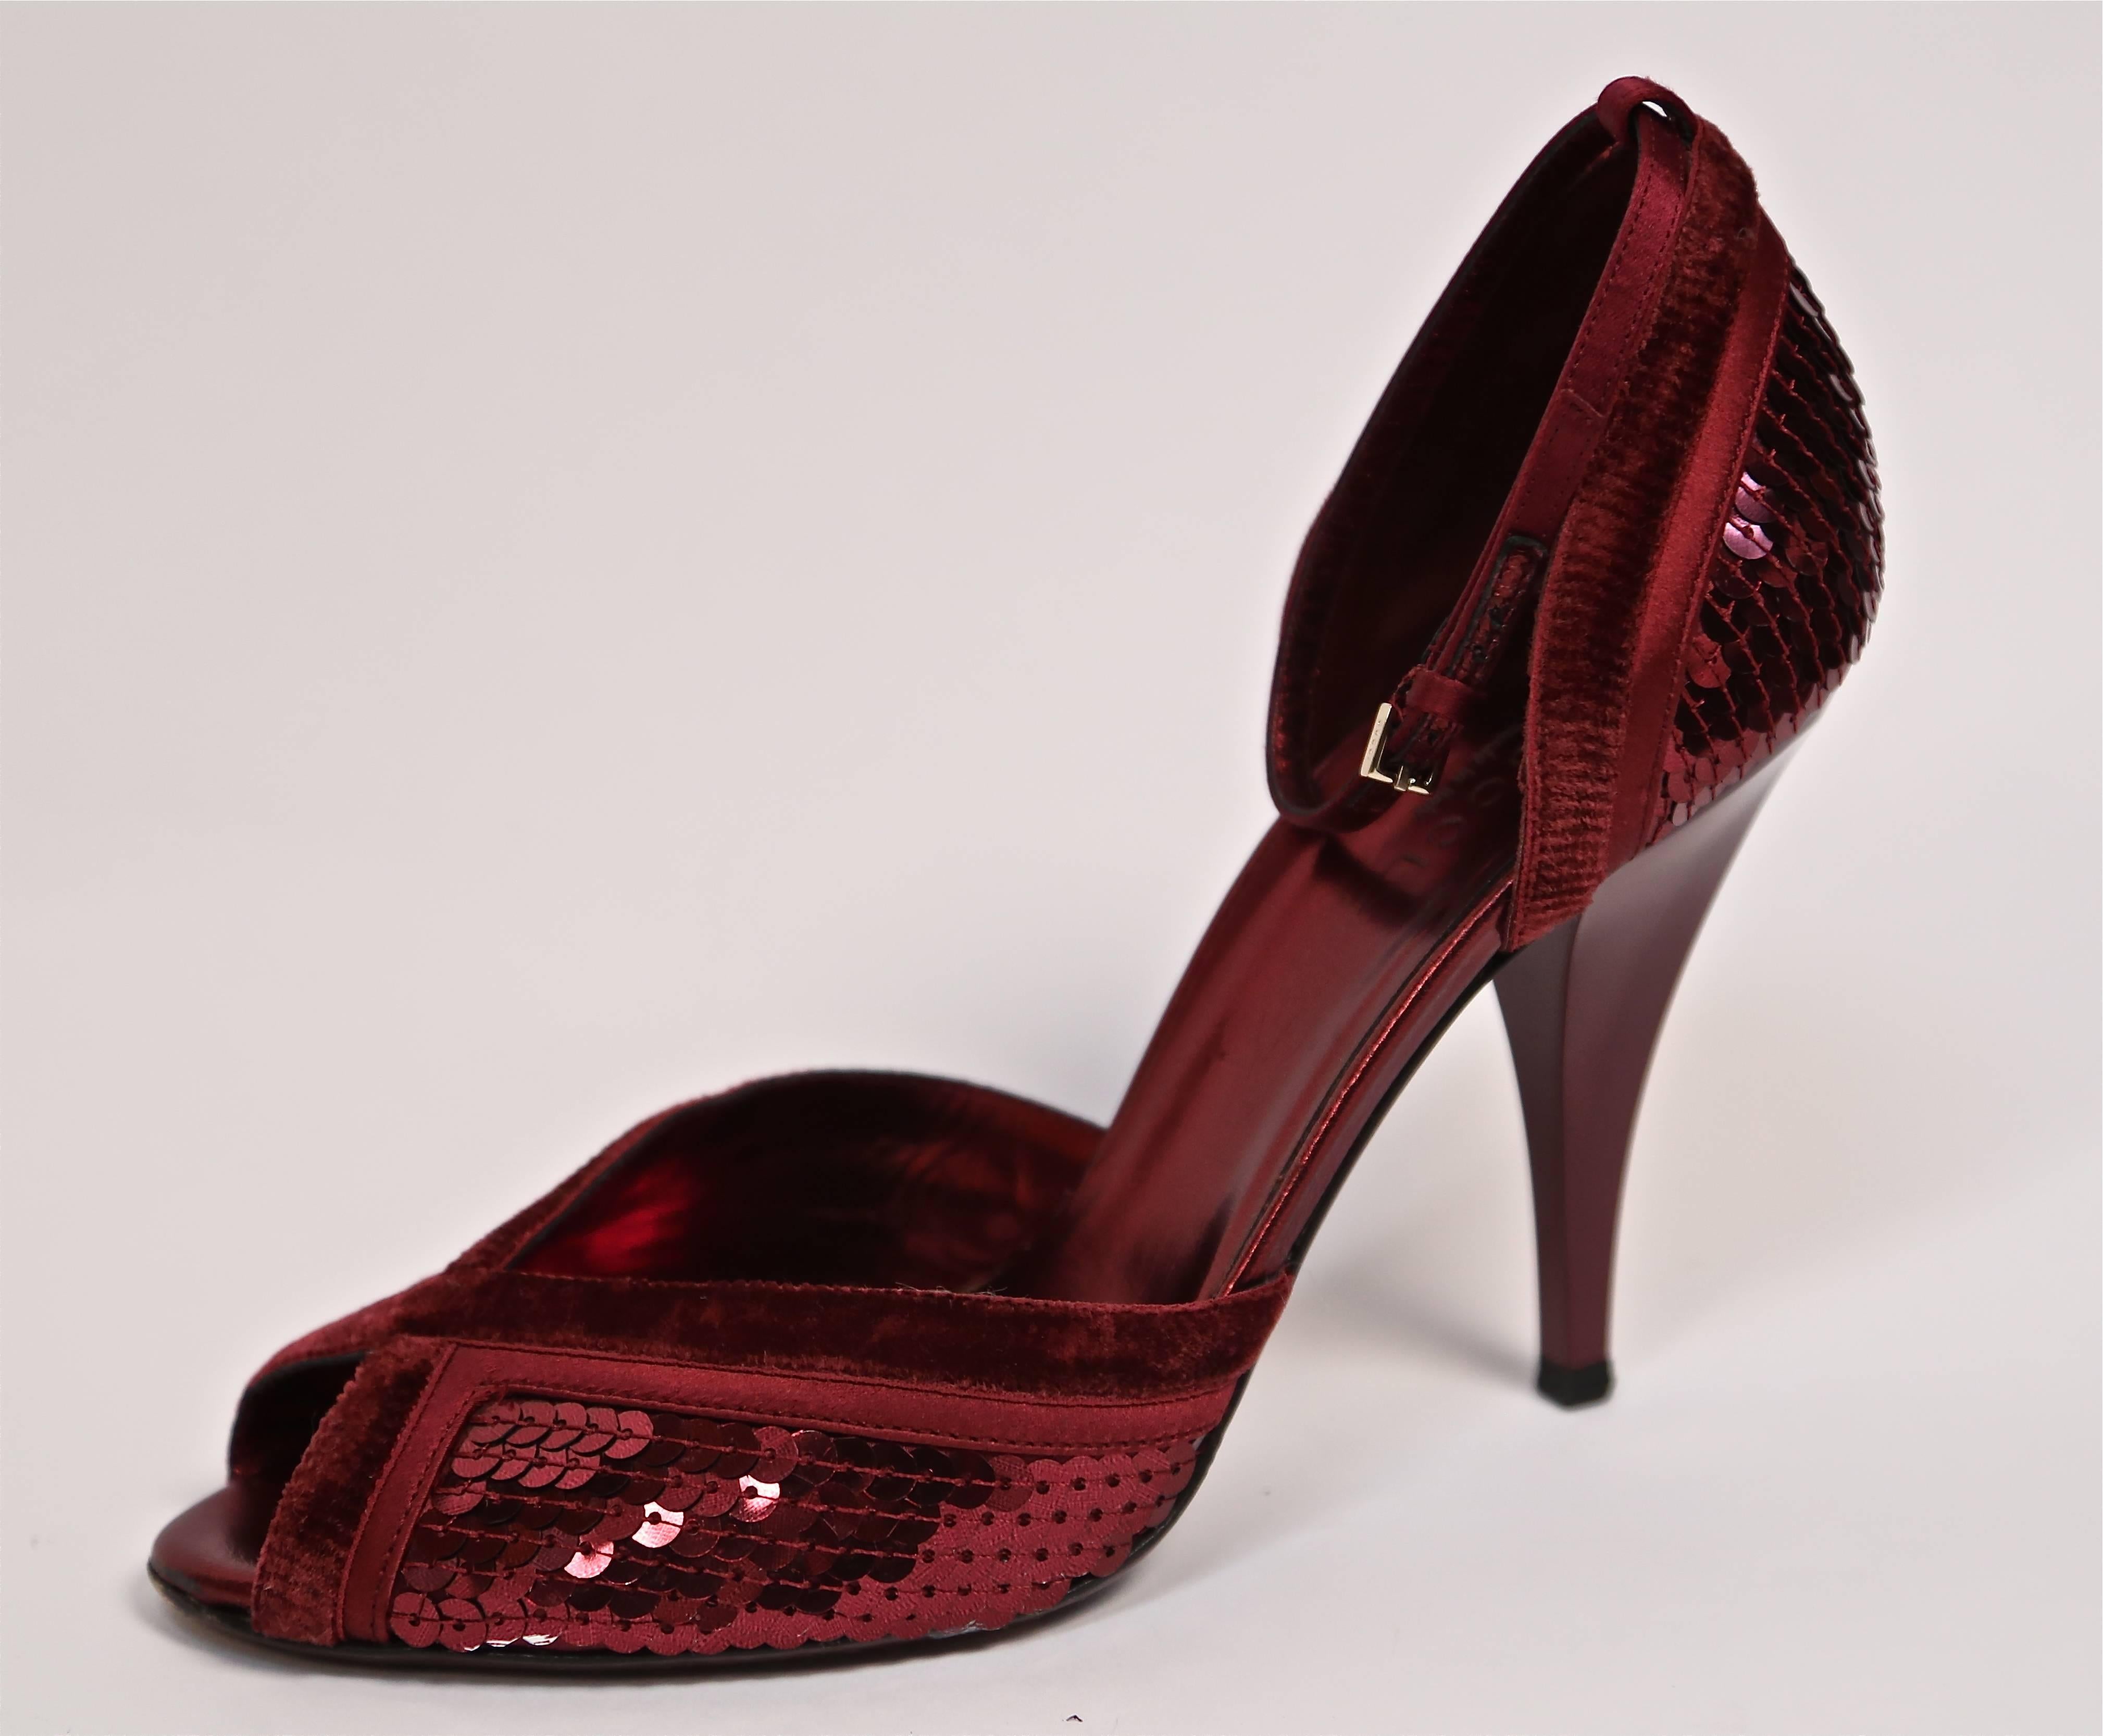 Burgundy velvet and sequined heels designed by Tom Ford for Gucci. Size 8B. Approximate measurements: length 10.25